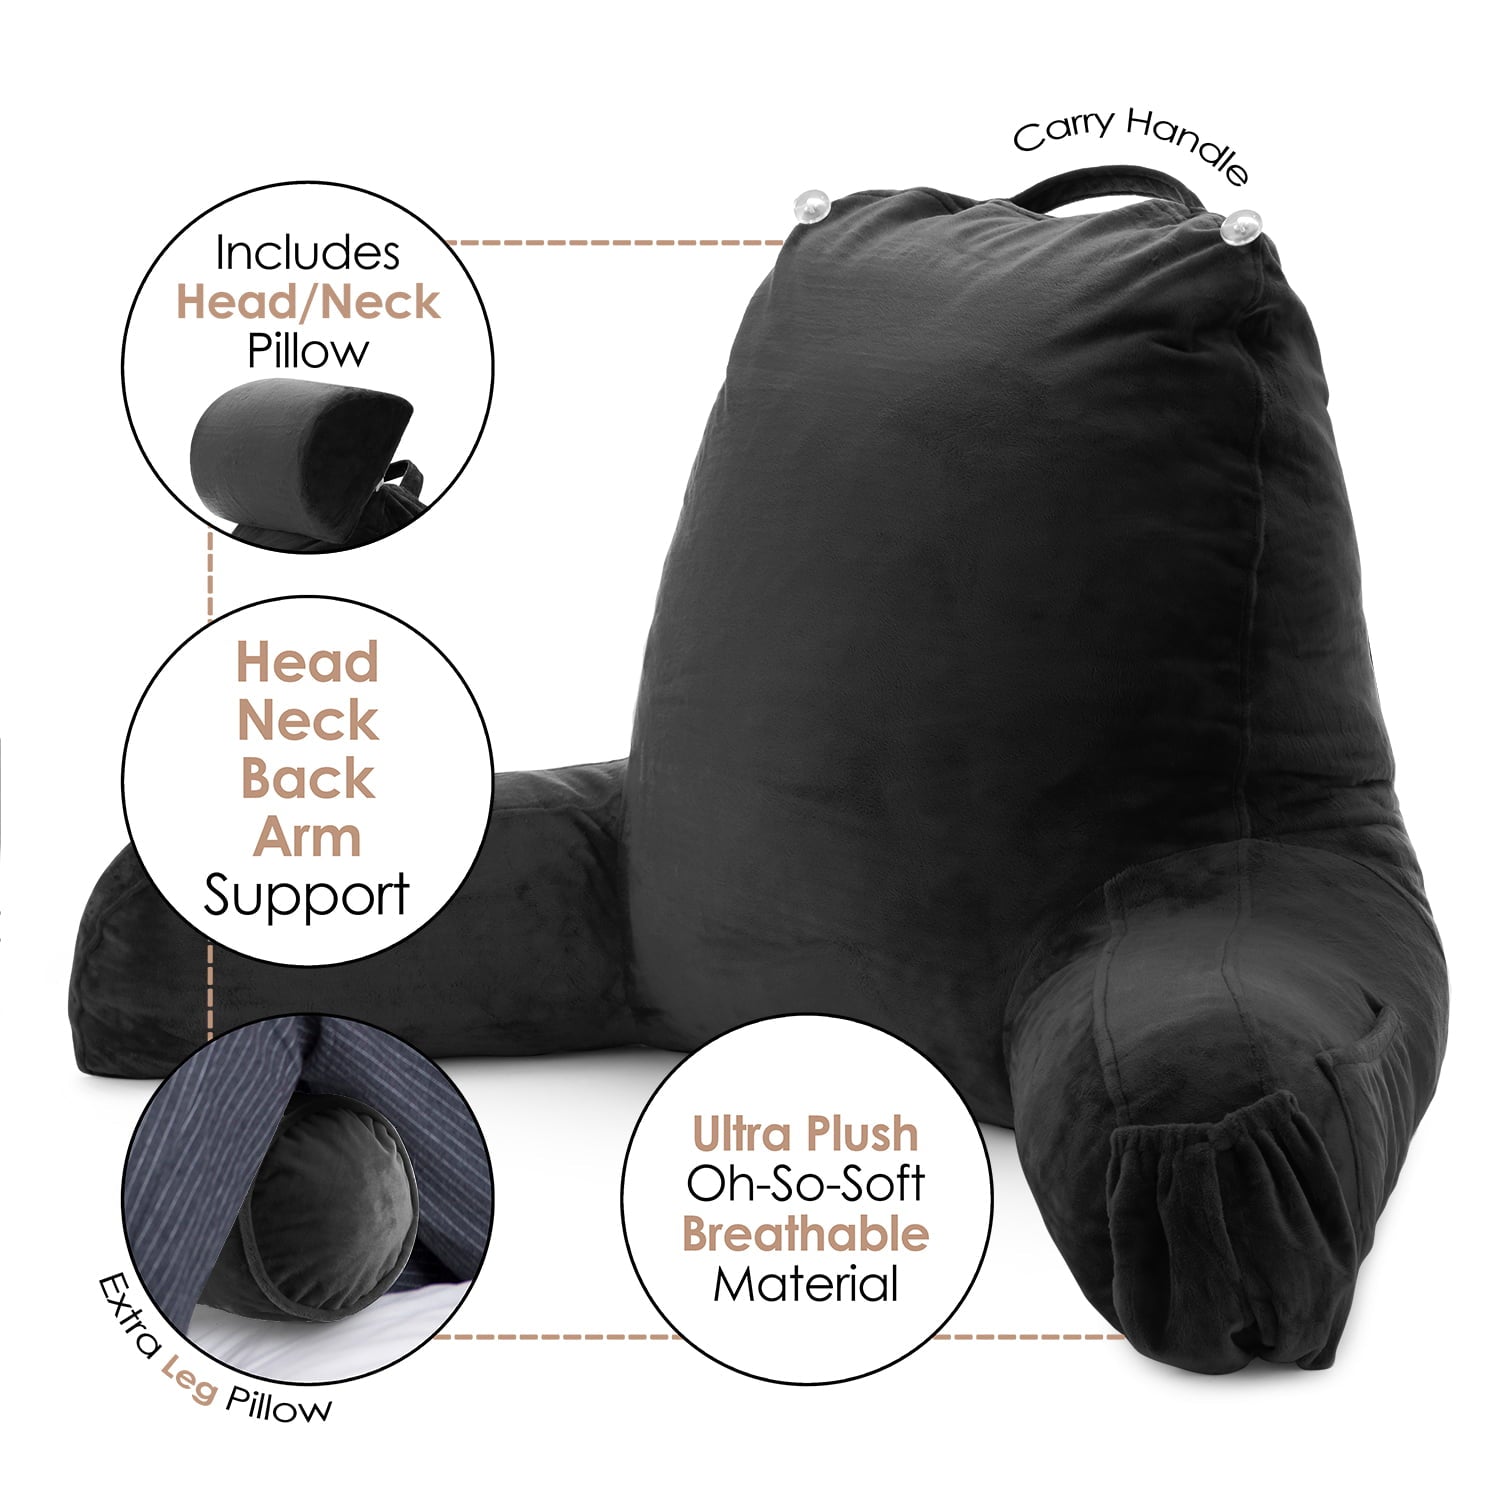 Nestl Reading Pillow, Extra Large Bed Rest Pillow with Arms – Premium Shredded Memory Foam TV Pillow, Detachable Neck Roll & Lumbar Support Pillow - Black